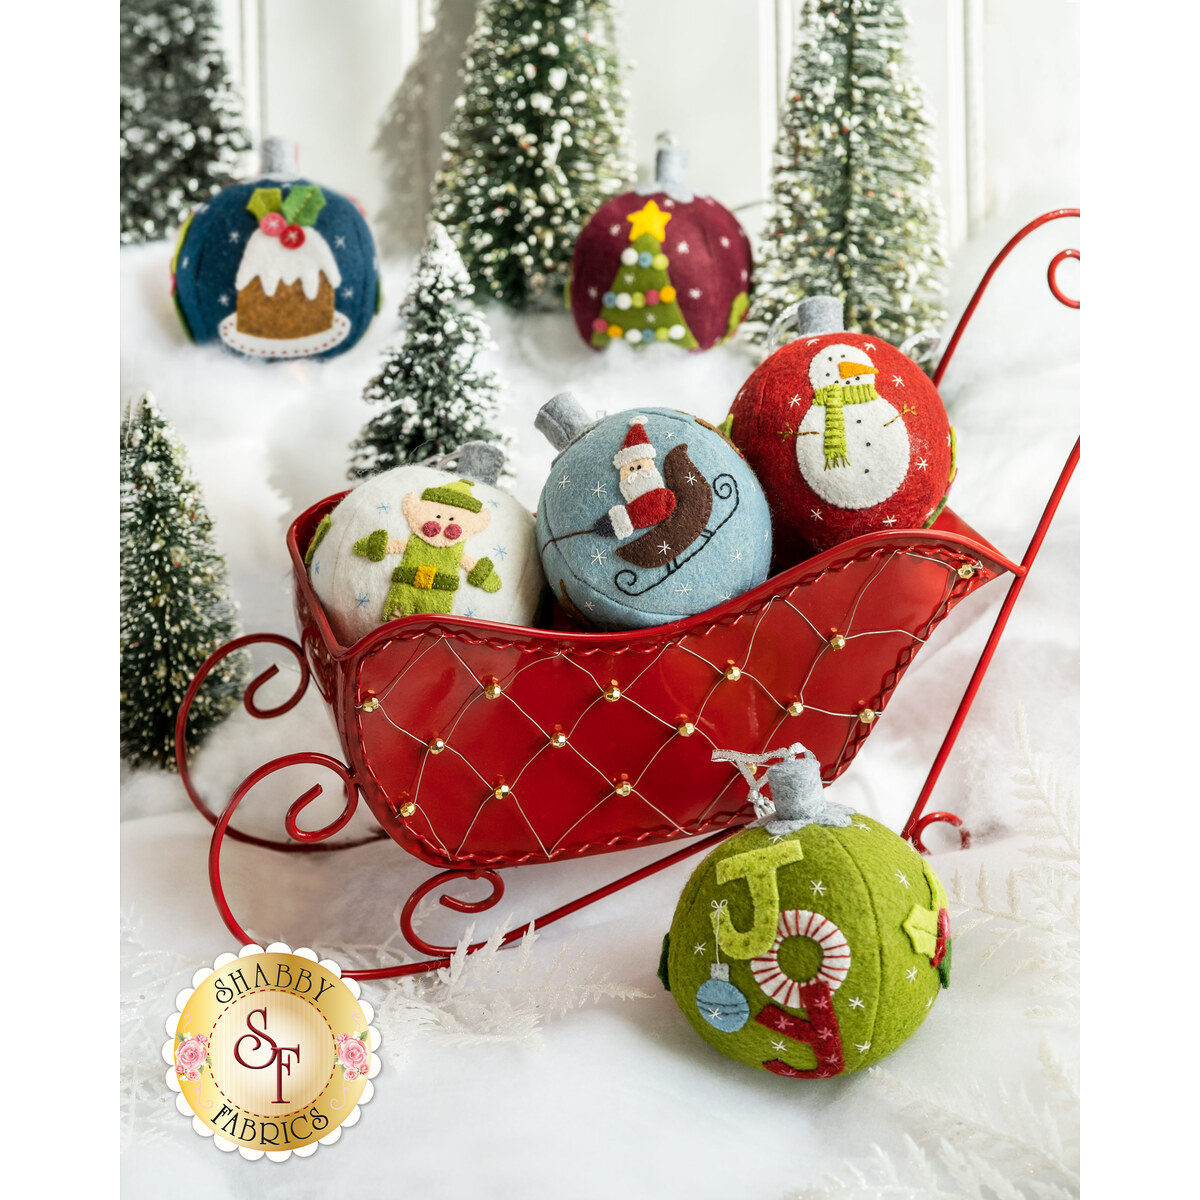 Everything Nice Ornament Kit - RESERVE